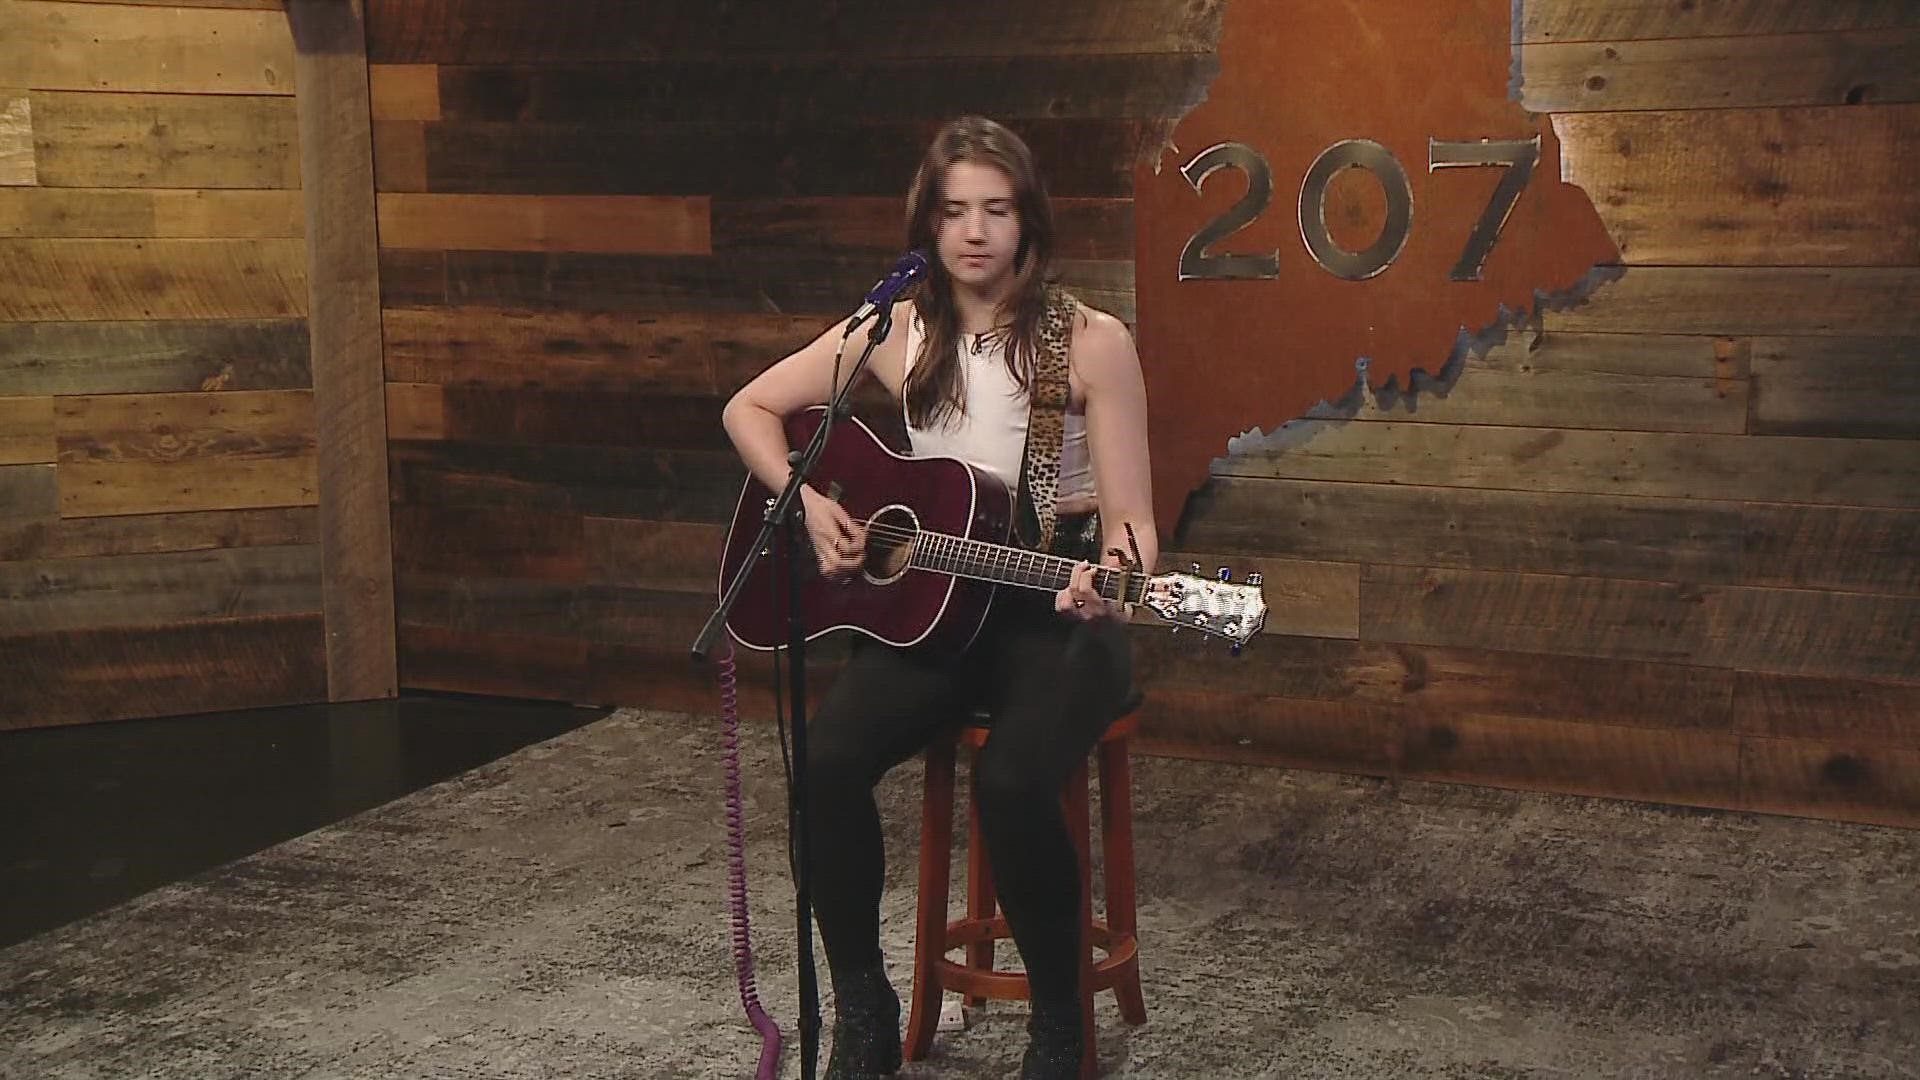 Maine singer and songwriter Holly Clough came on 207 to perform new music.